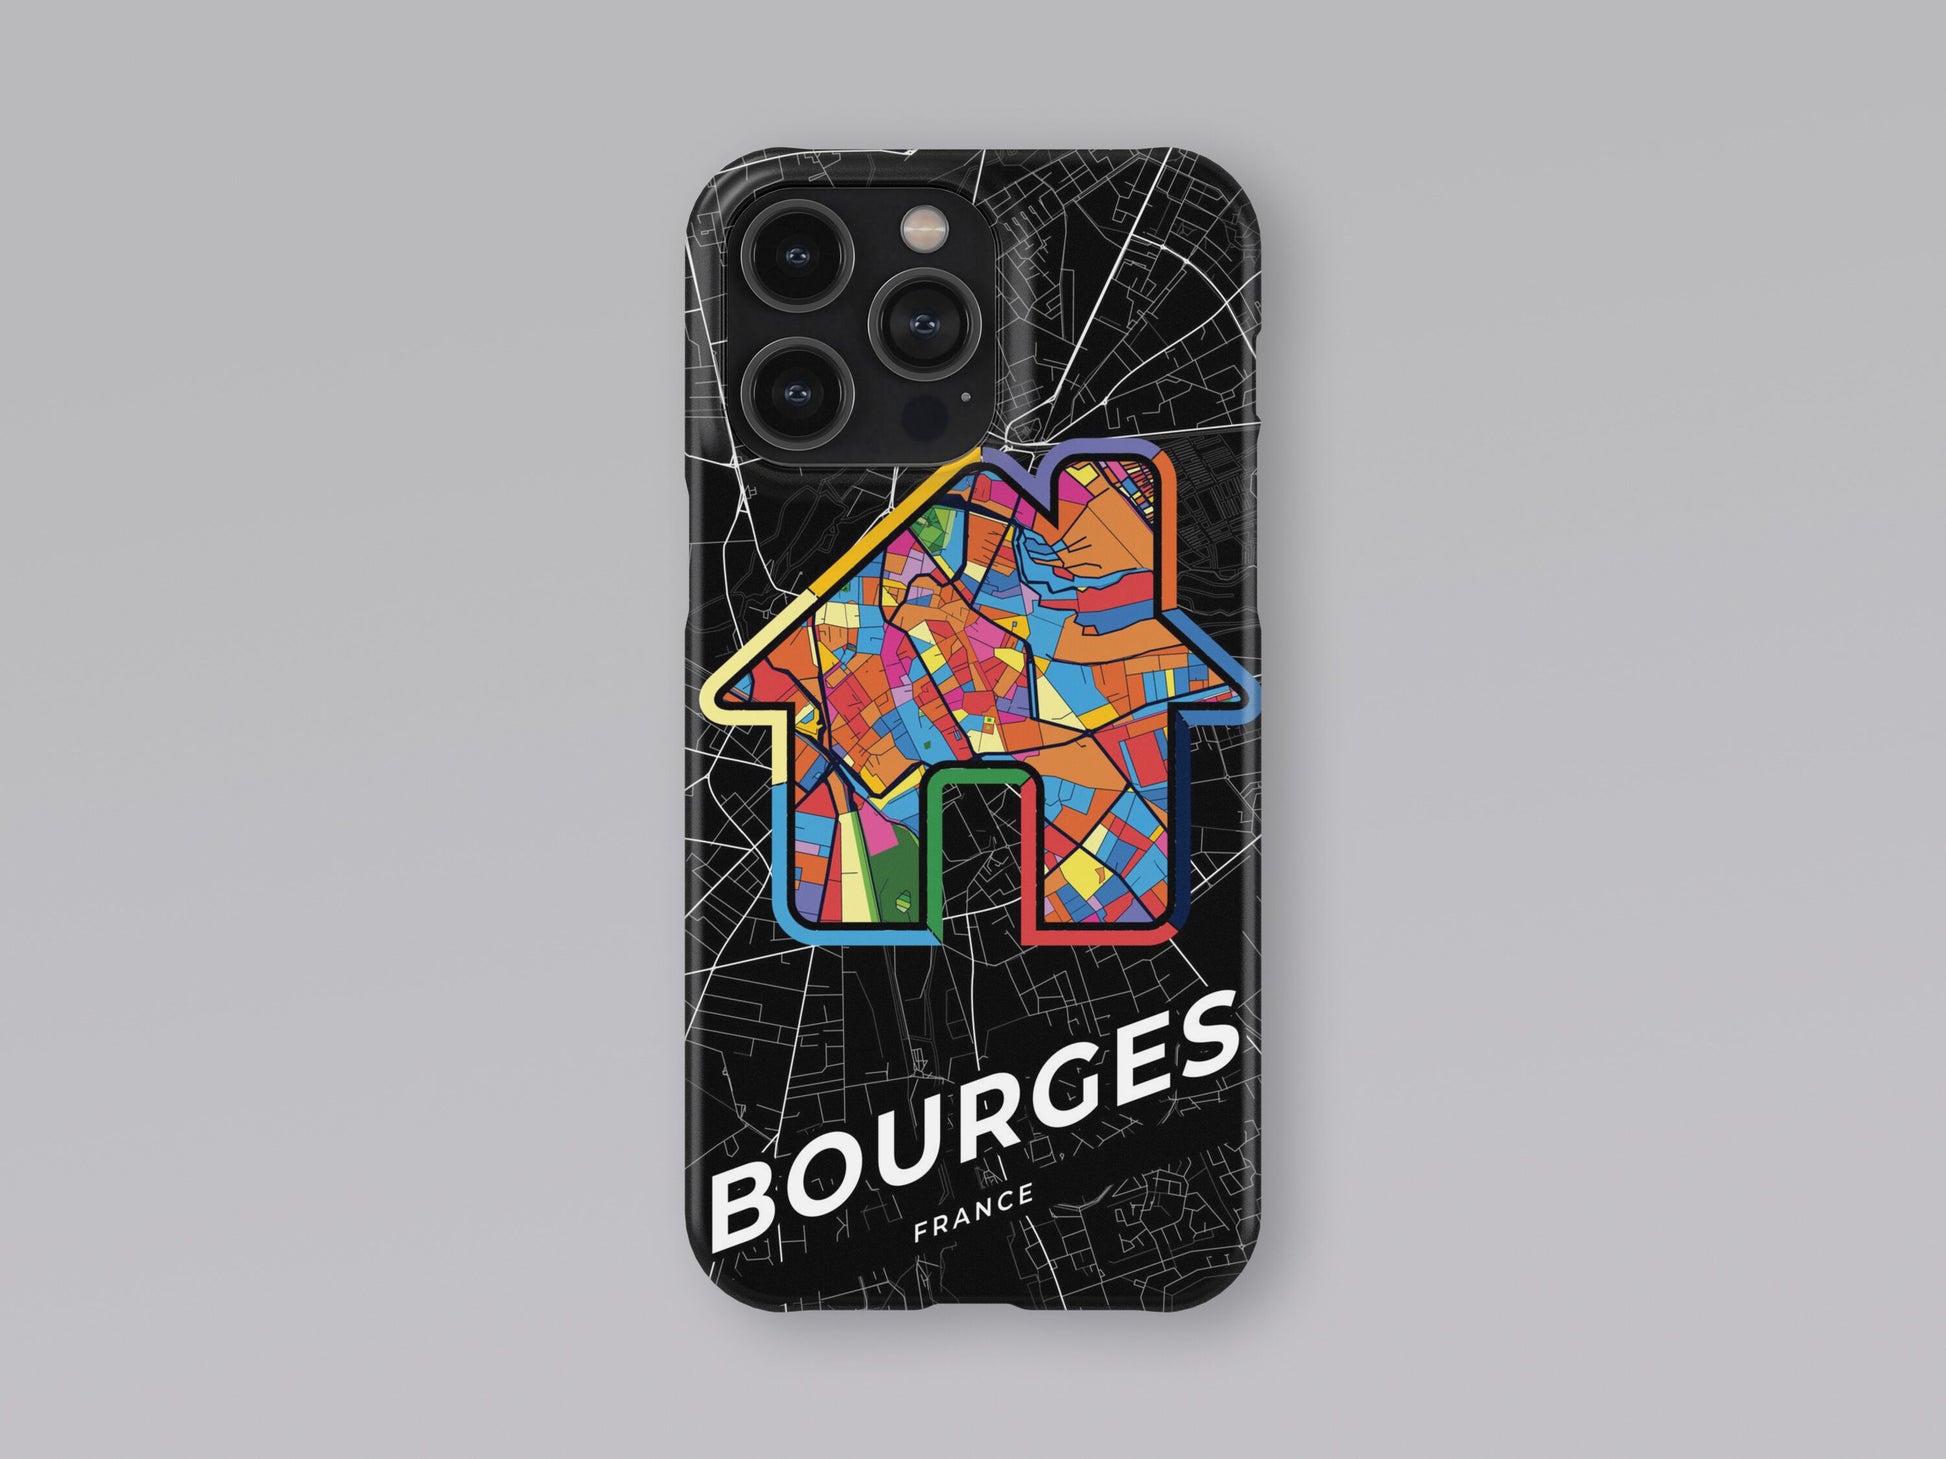 Bourges France slim phone case with colorful icon. Birthday, wedding or housewarming gift. Couple match cases. 3